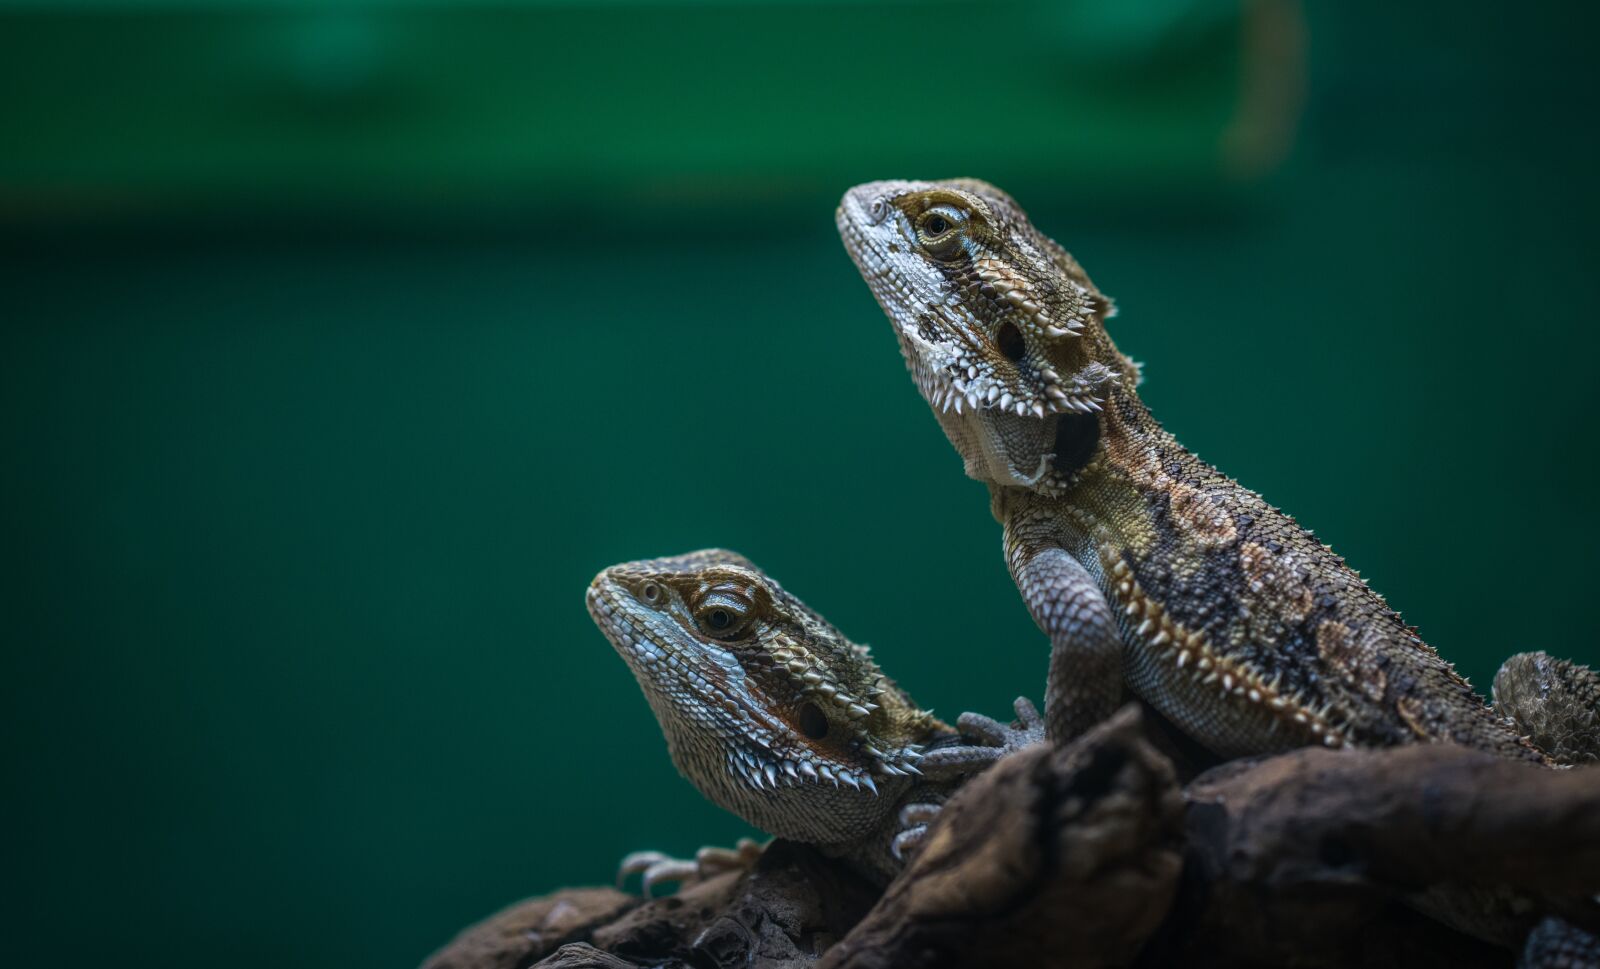 Sony a7R II sample photo. Reptile, lizard, nature photography